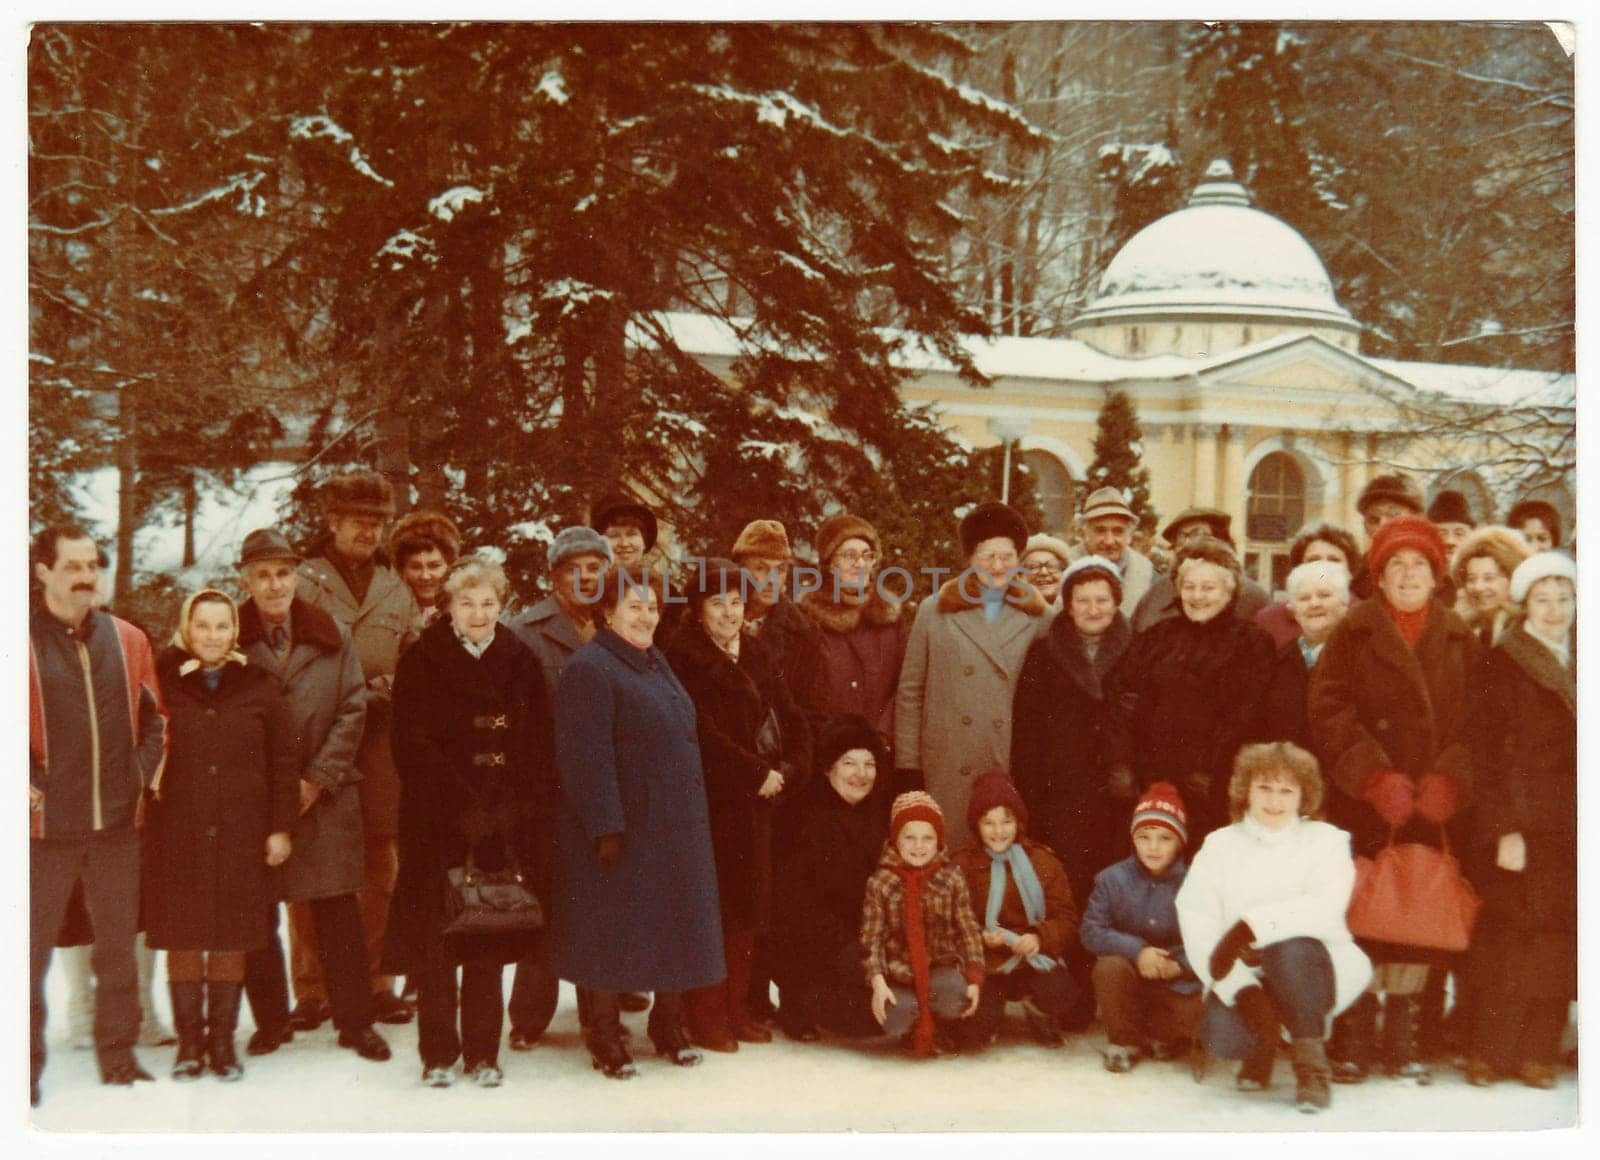 THE CZECHOSLOVAK SOCIALIST REPUBLIC - CIRCA 1980s: Vintage photo shows group of people on winter vacation.